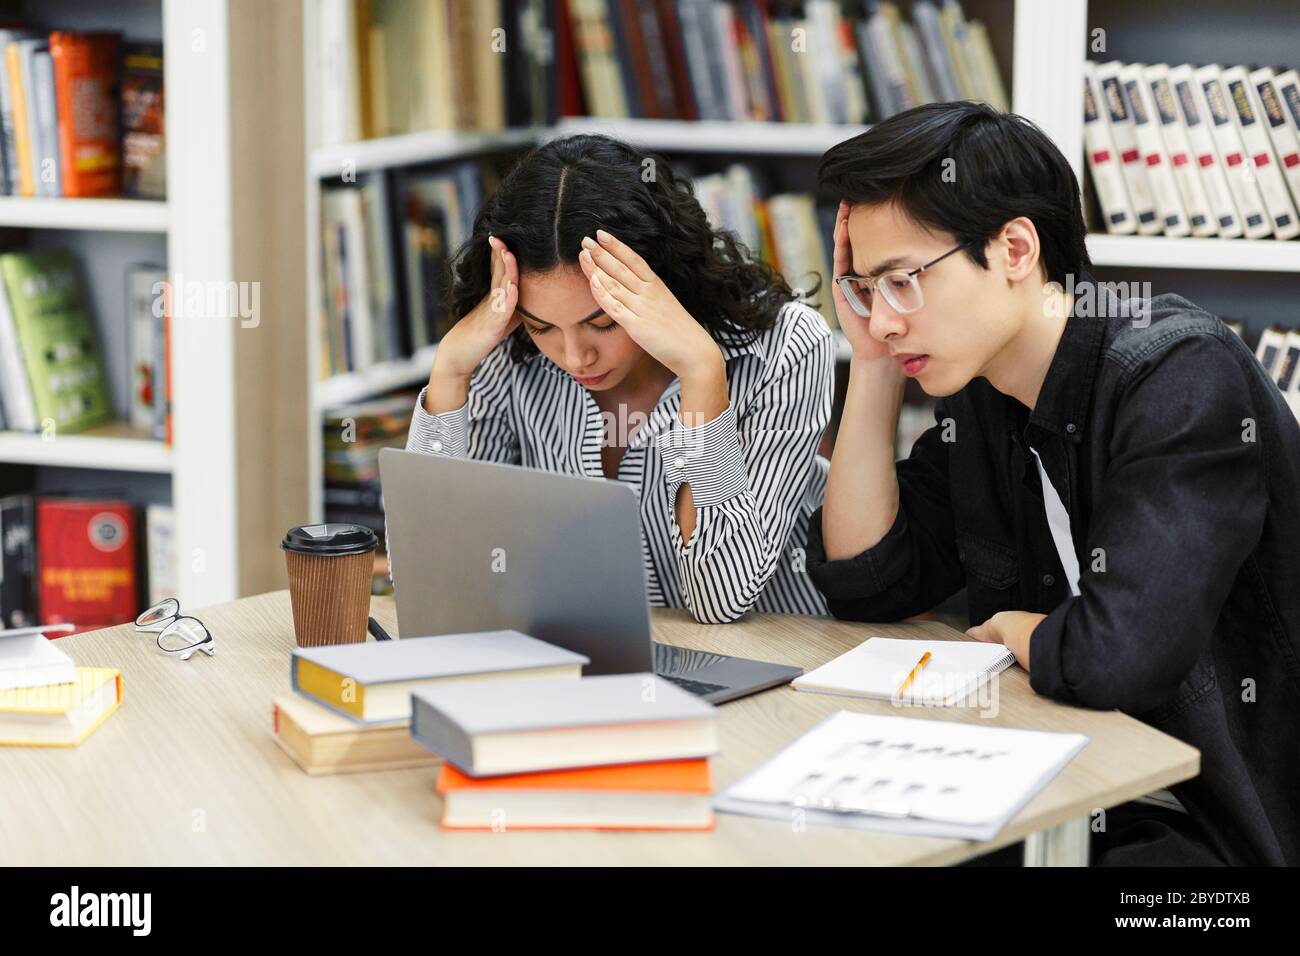 Stressed students preparing for examination in library Stock Photo